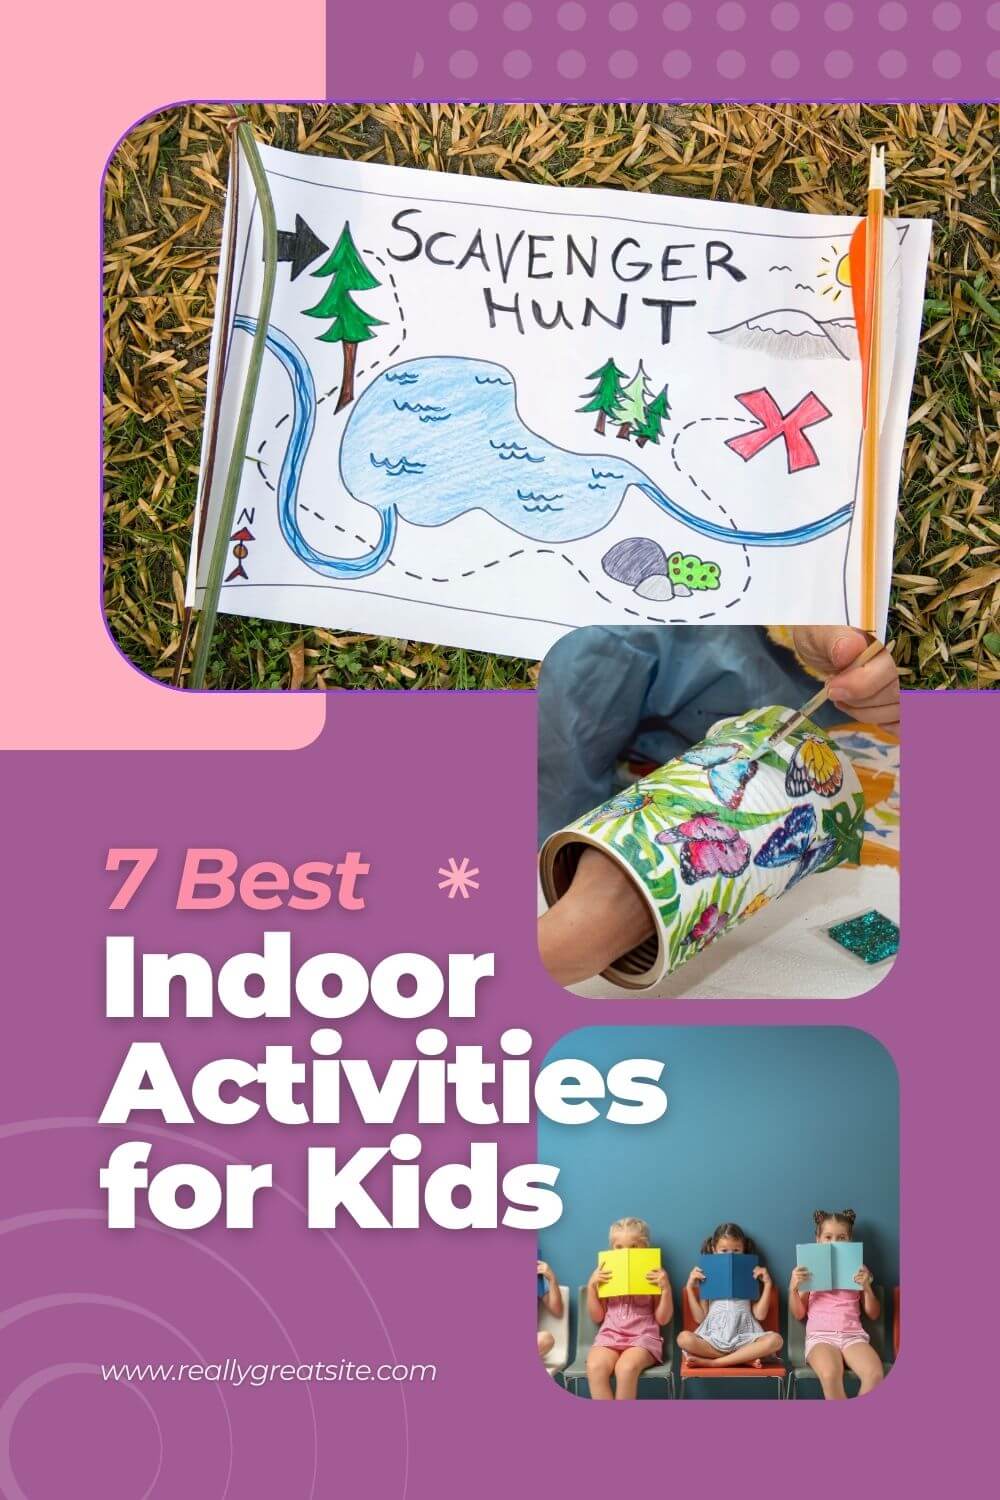 7 Indoor Activities for Kids to Keep Them Entertained - The BeauTraveler